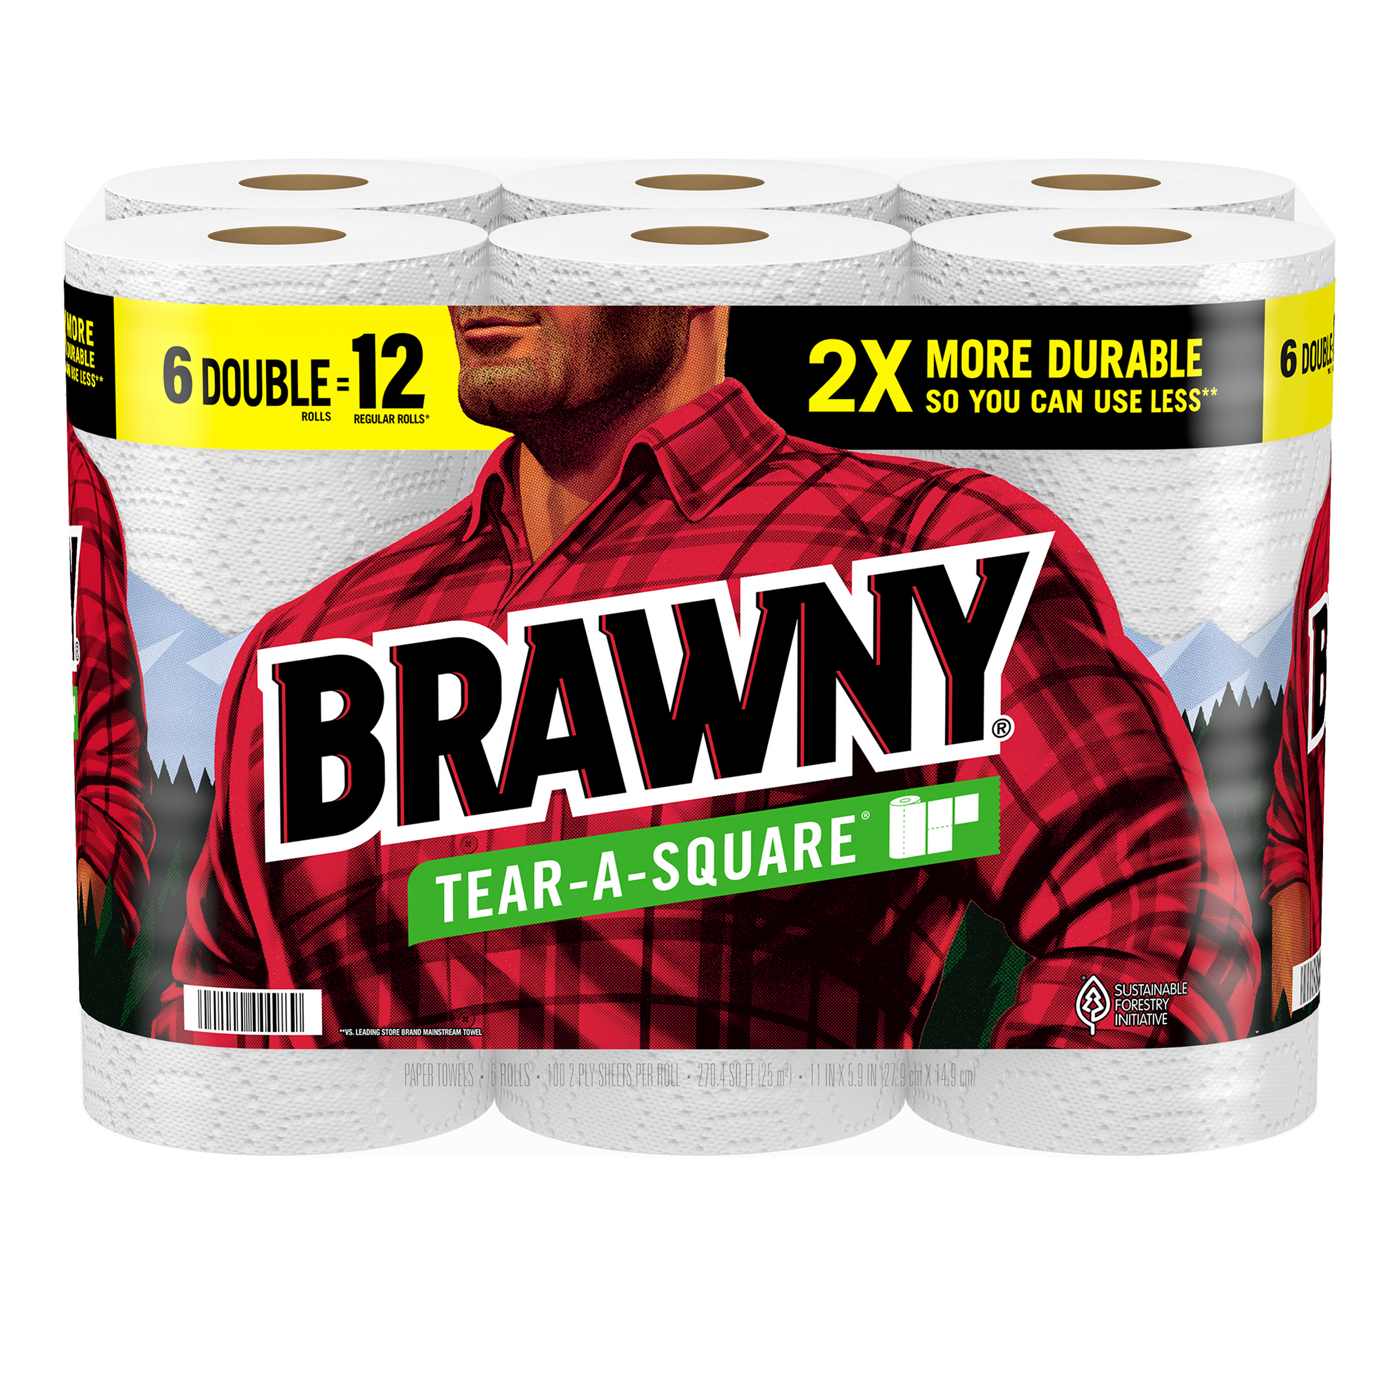 Brawny Tear-A-Square Paper Towels; image 1 of 2